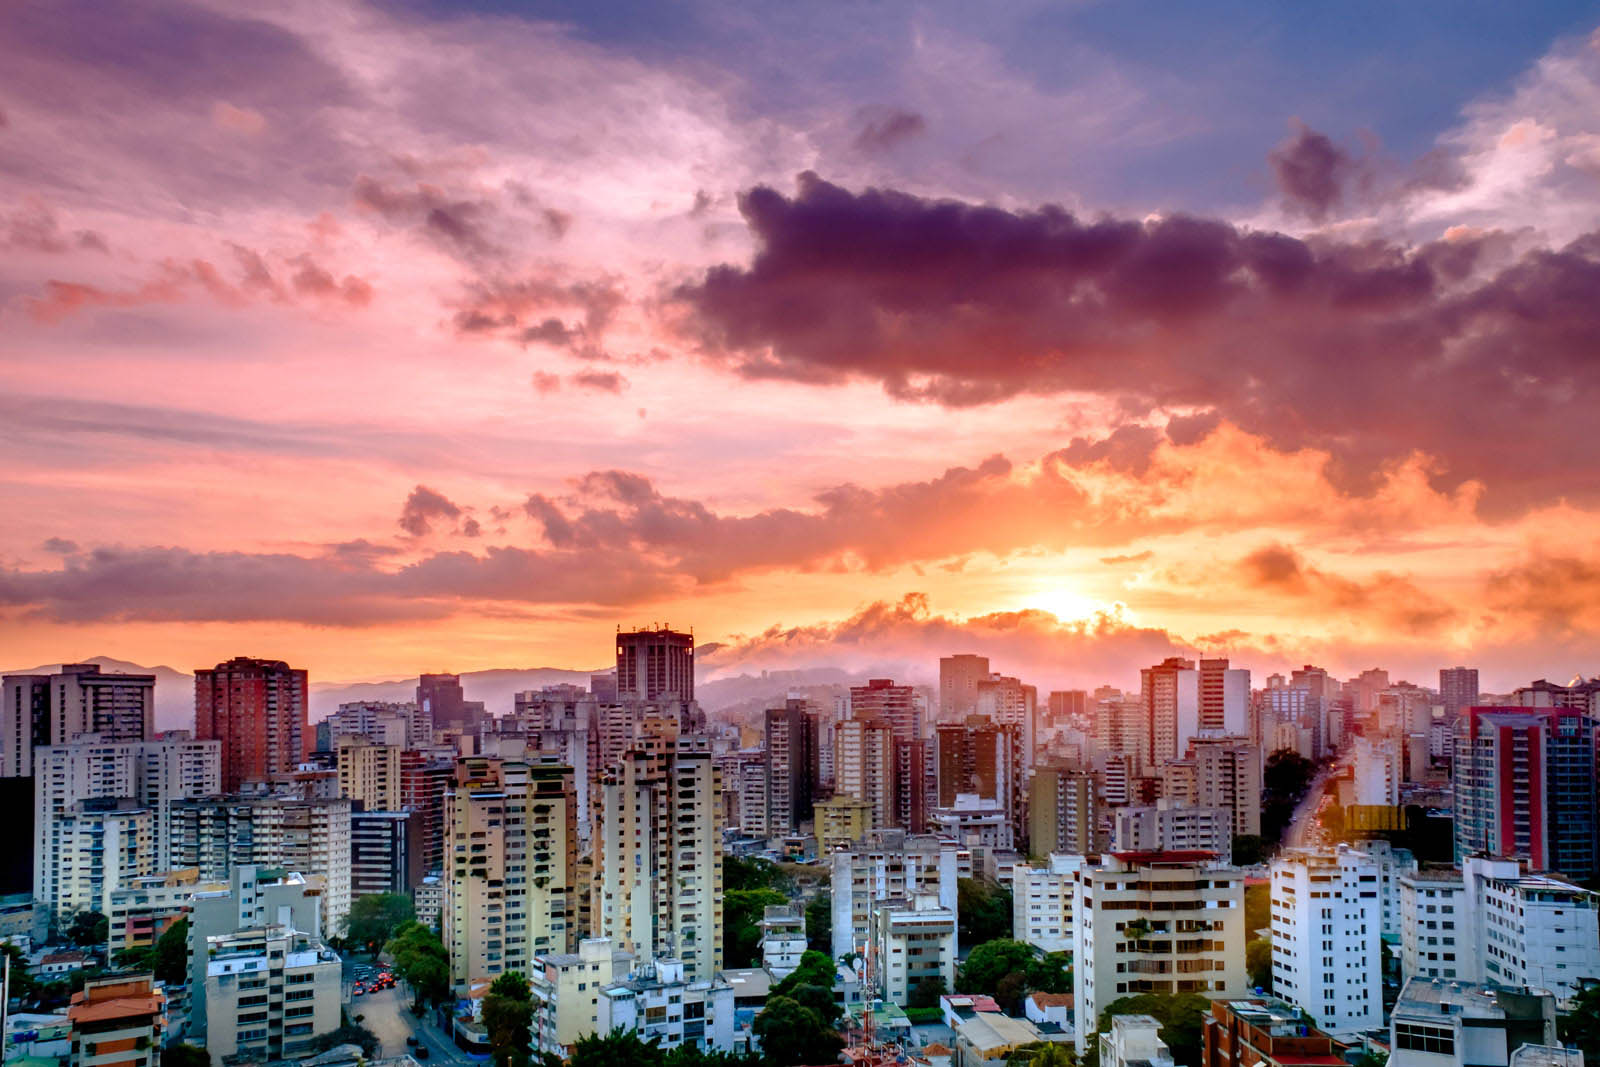 Unfortunately, Most People Will Struggle to Locate These Countries — Can You Get 17/25? Skyline Of Caracas, Venezuela